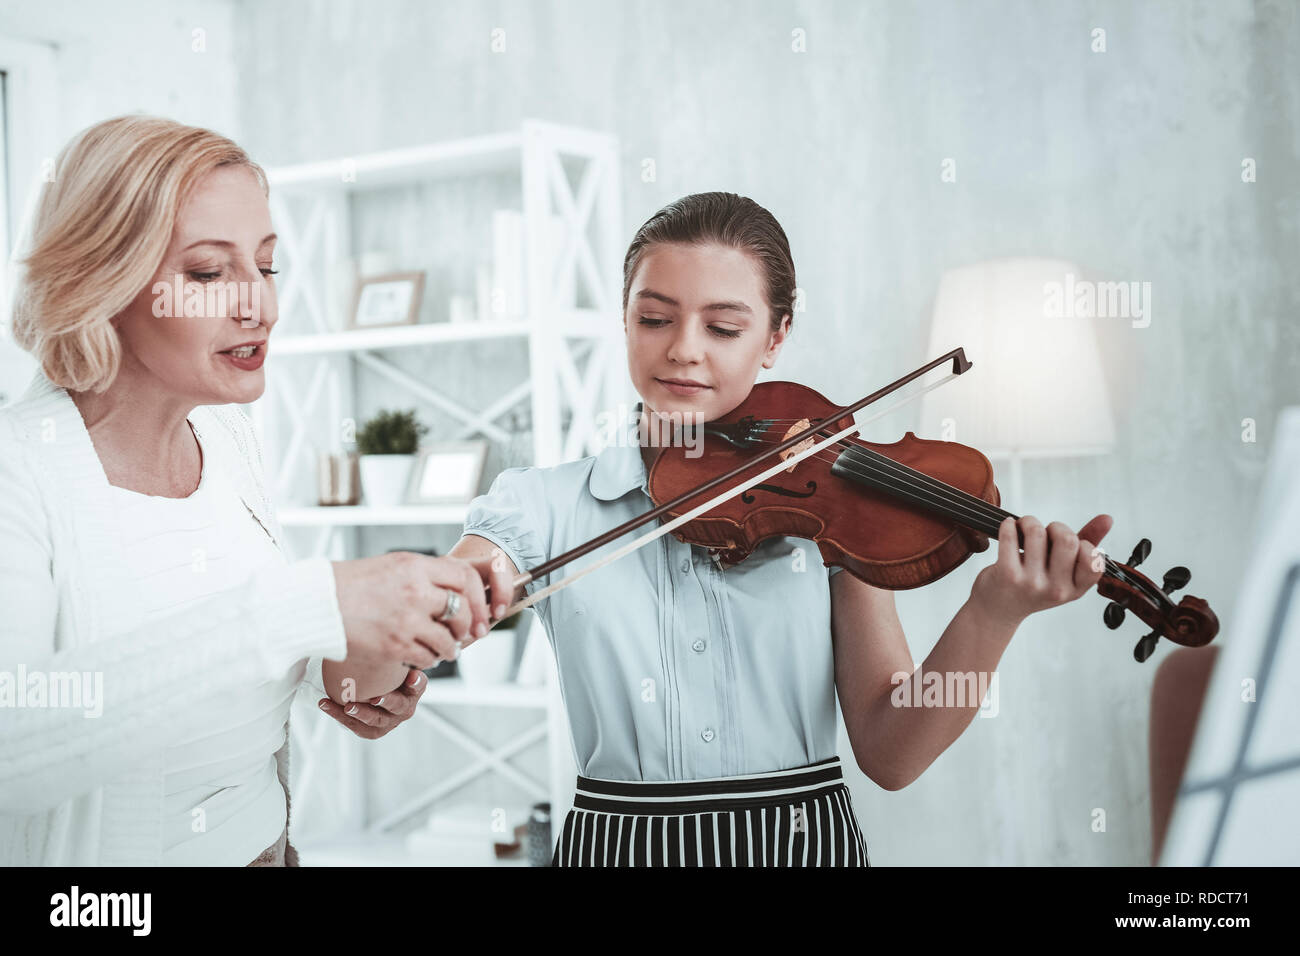 Serious professional music teacher holding a violin bow Stock Photo